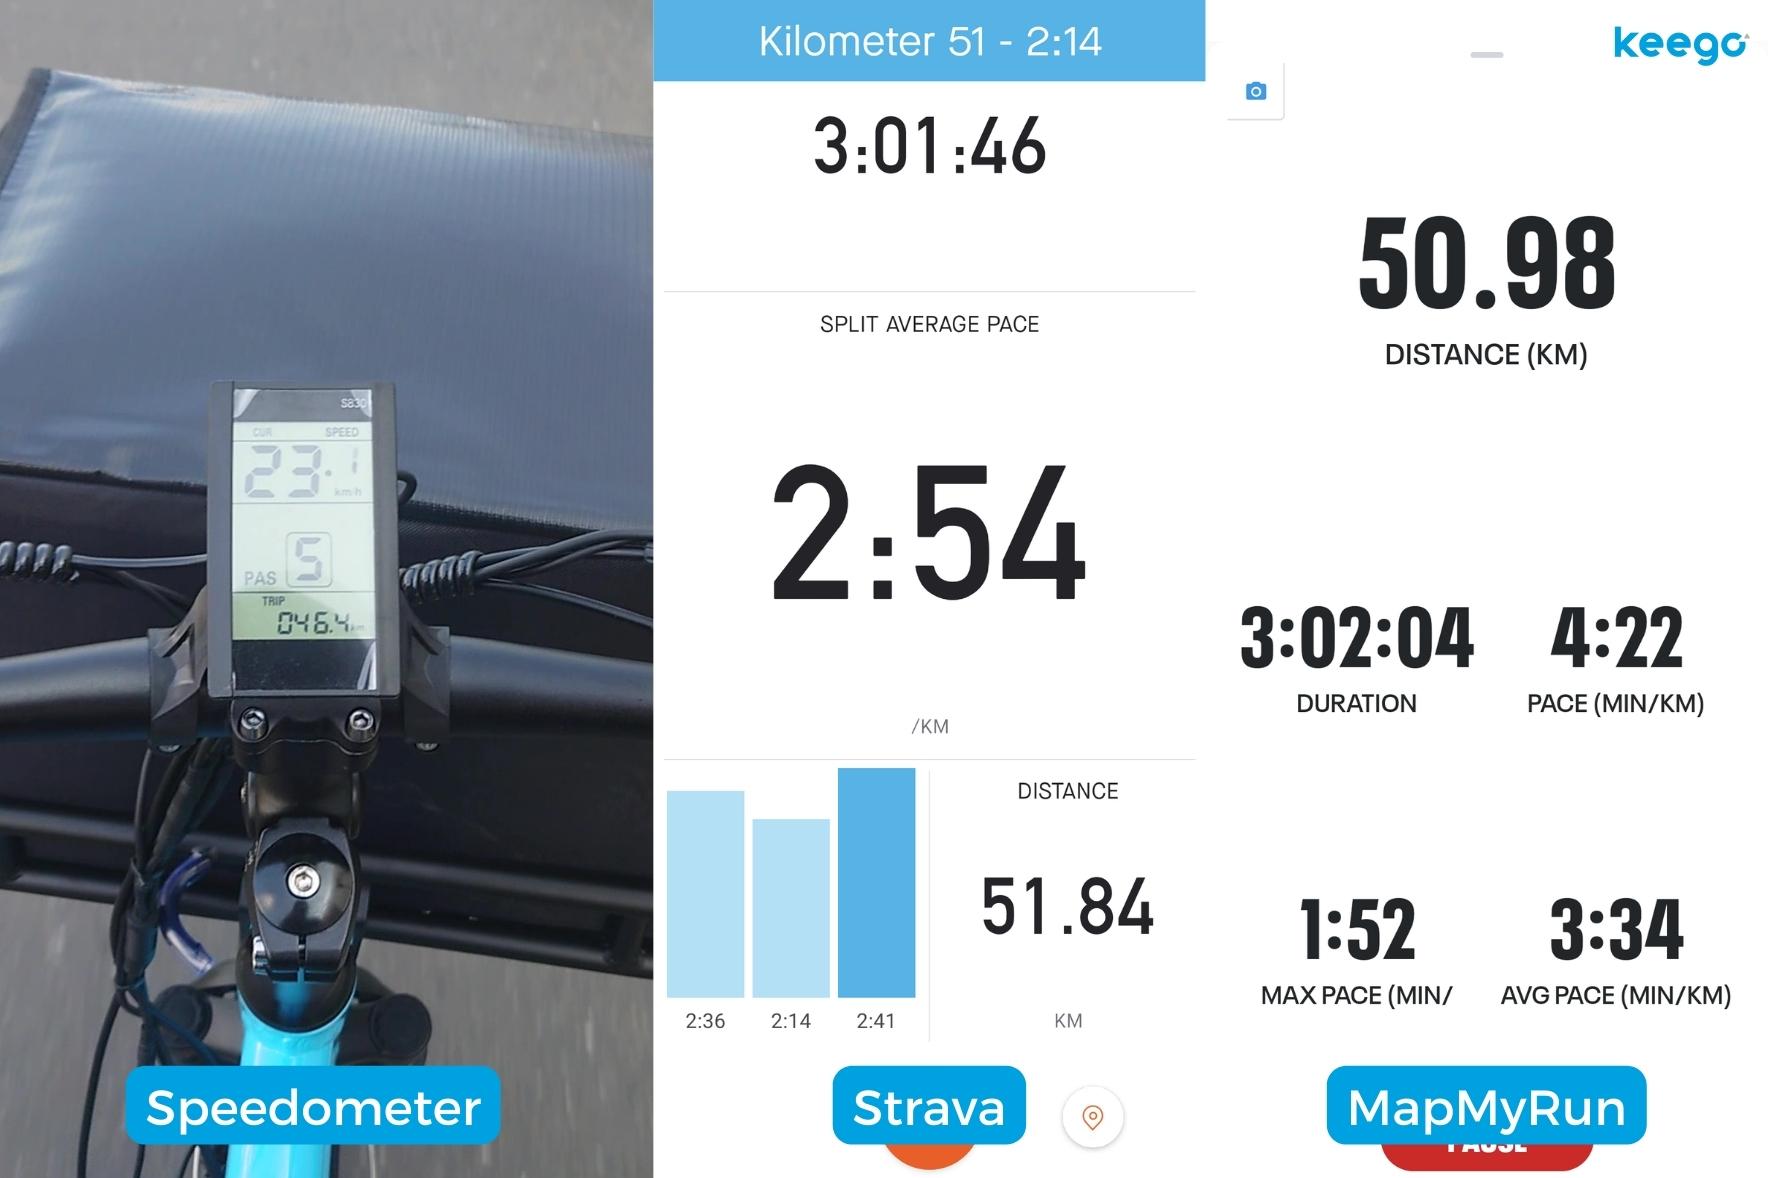 Distance recorded by the speedometer, Strava, and MapMyRun - Keego Mobility